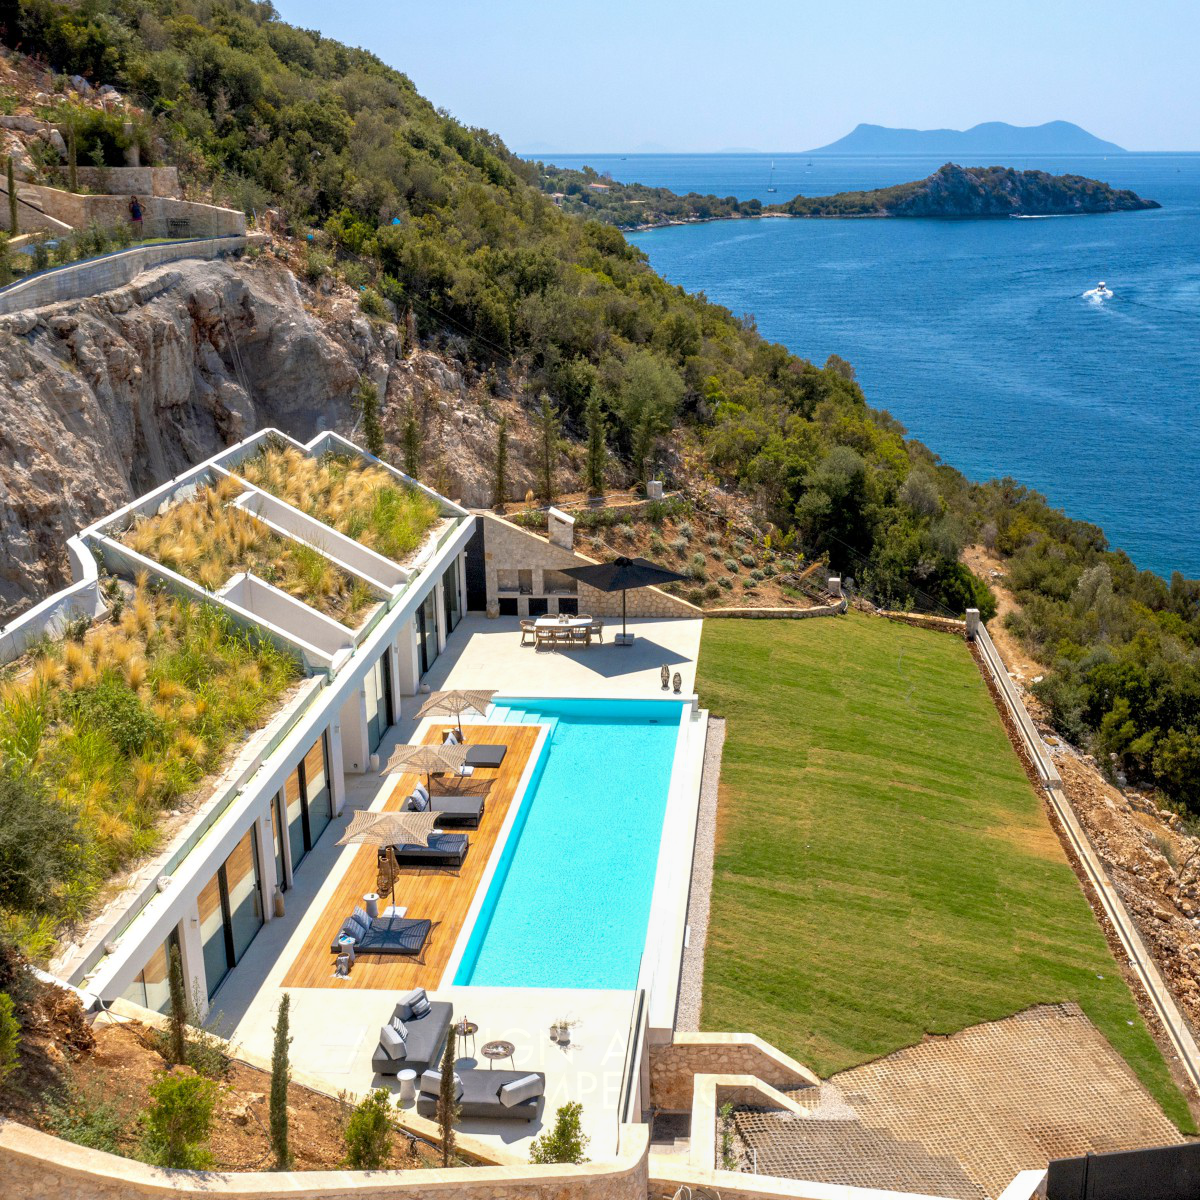 VASSILIS SIAFARICAS wins Bronze at the prestigious A' Sustainable Products, Projects and Green Design Award with Villa Atlas Summer Villa.